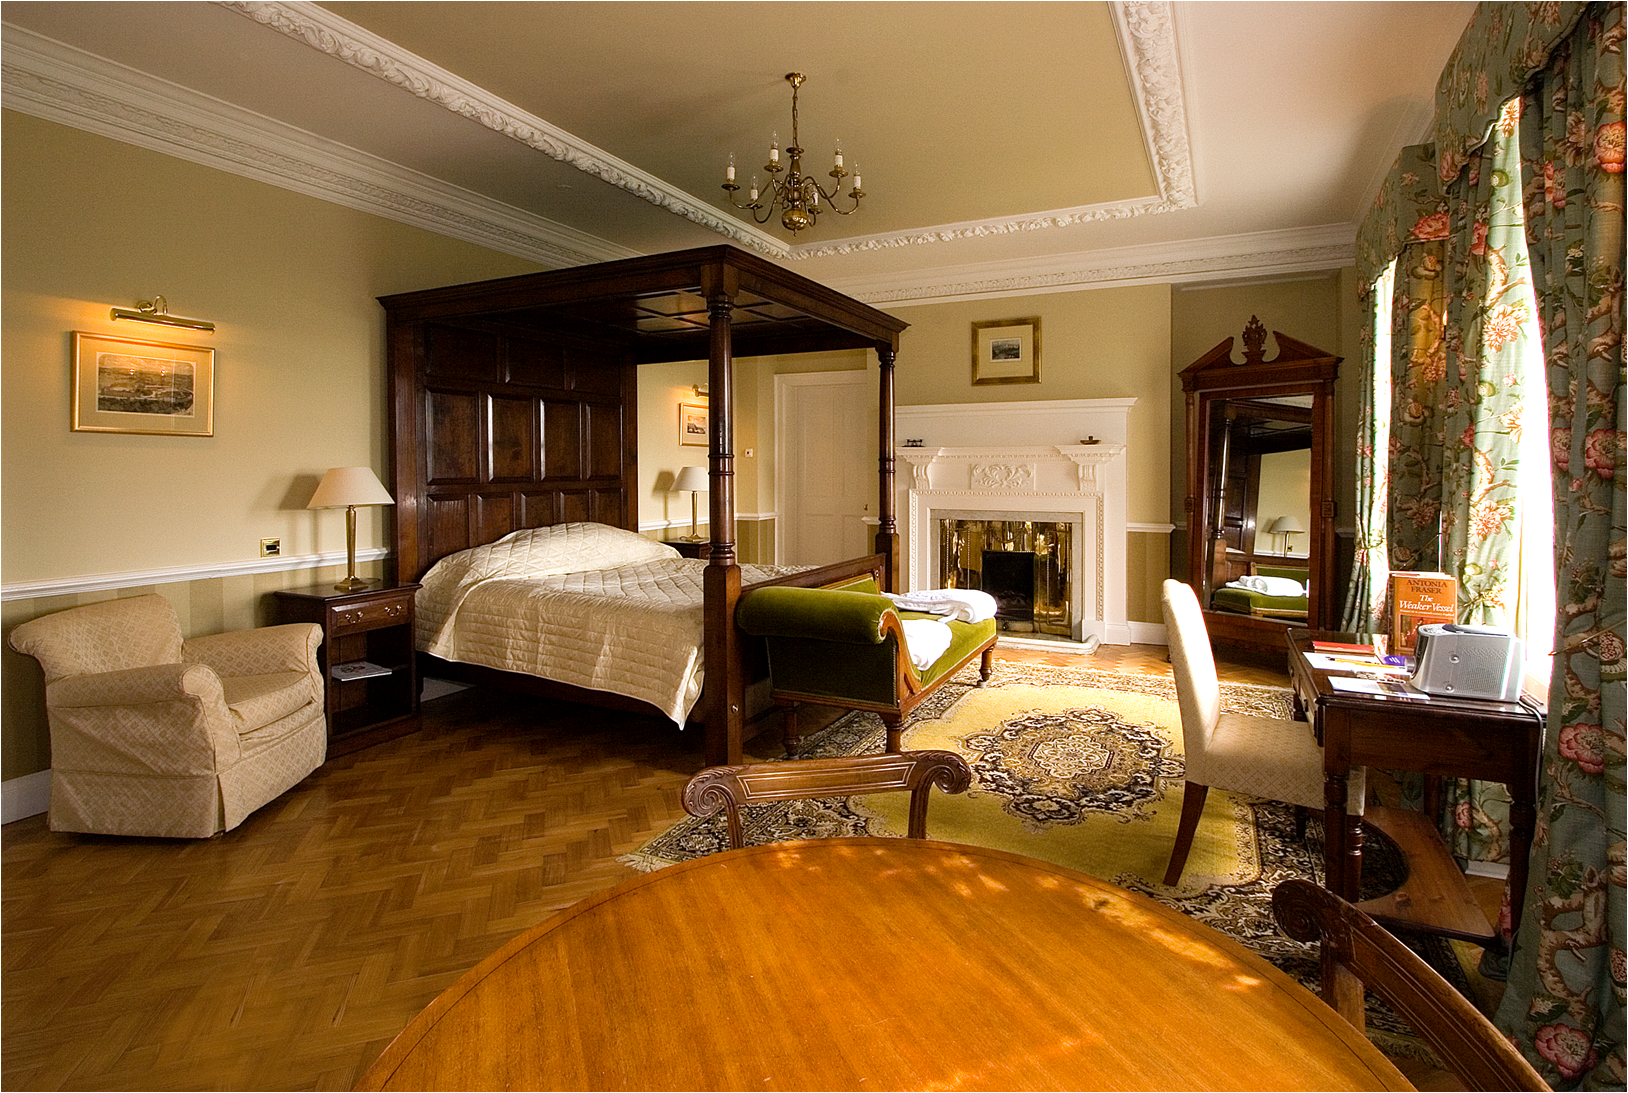 The bridal suite in Cumberland Lodge, perfect for weddings and celebrations